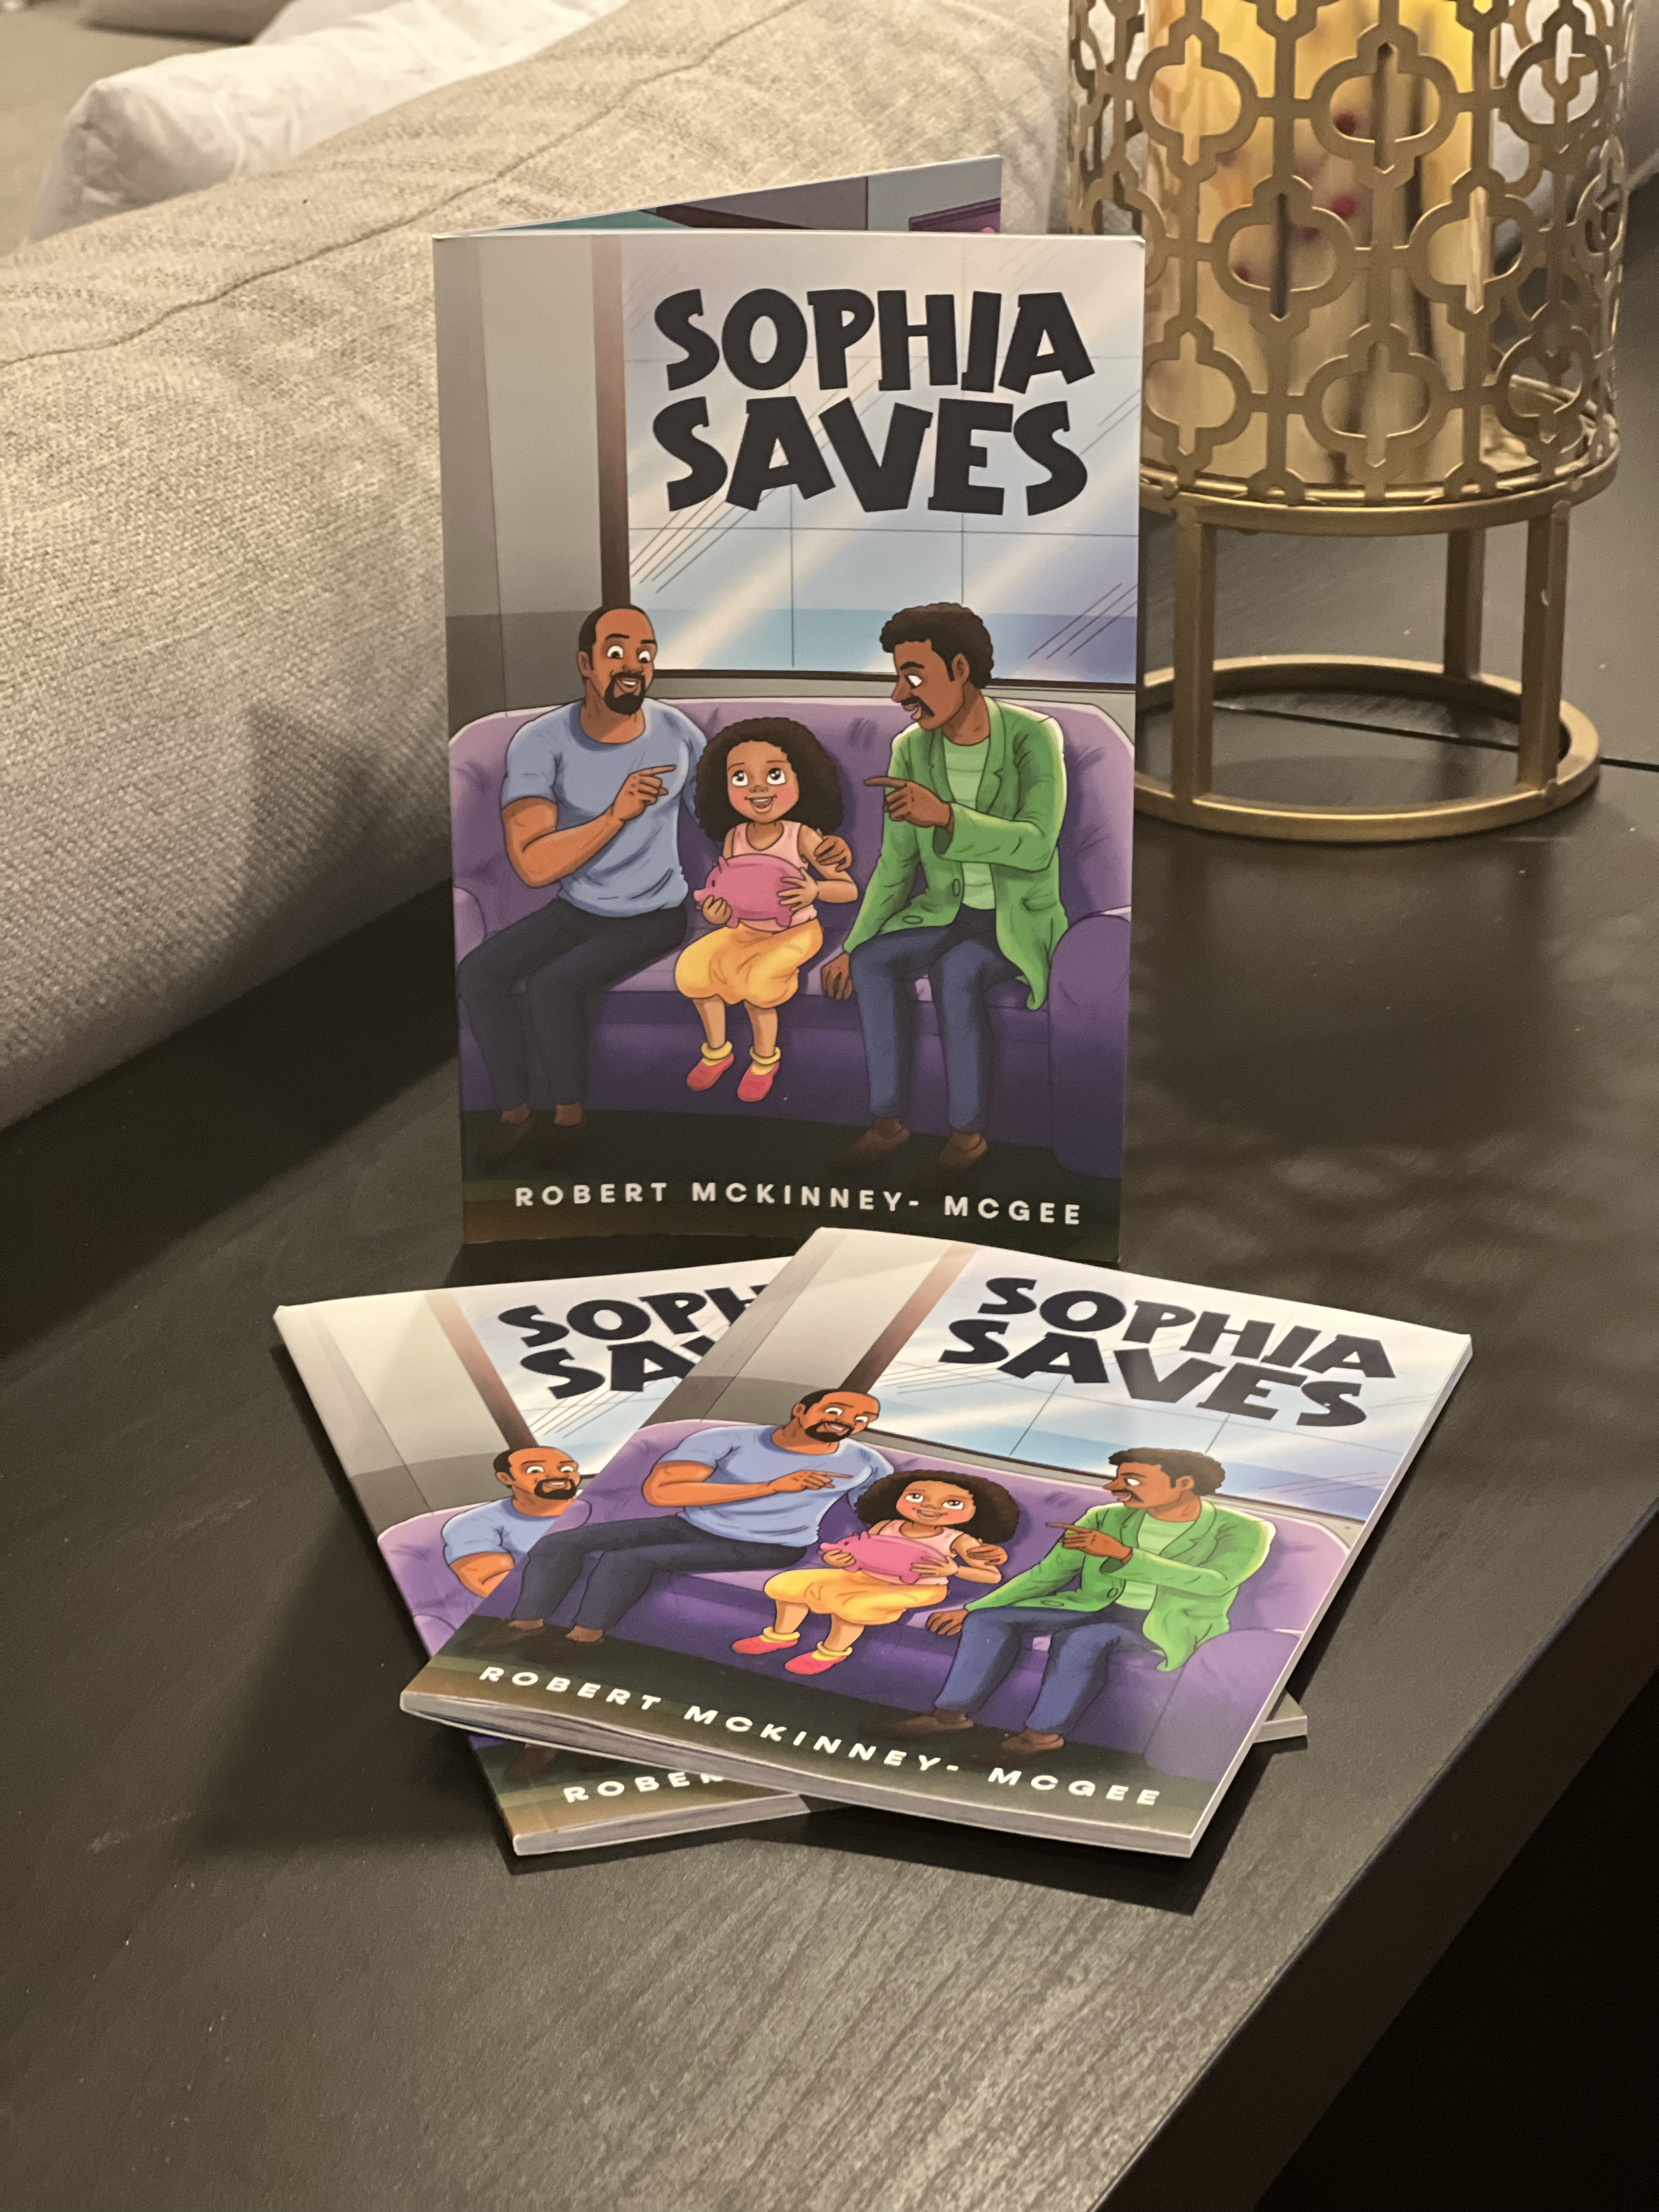 New Children's Book Author Robert McKinney McGee Releases Graphic Novel "Sophia Saves" in Chicago, IL, Illustrating the Financial Literacy and Family Values